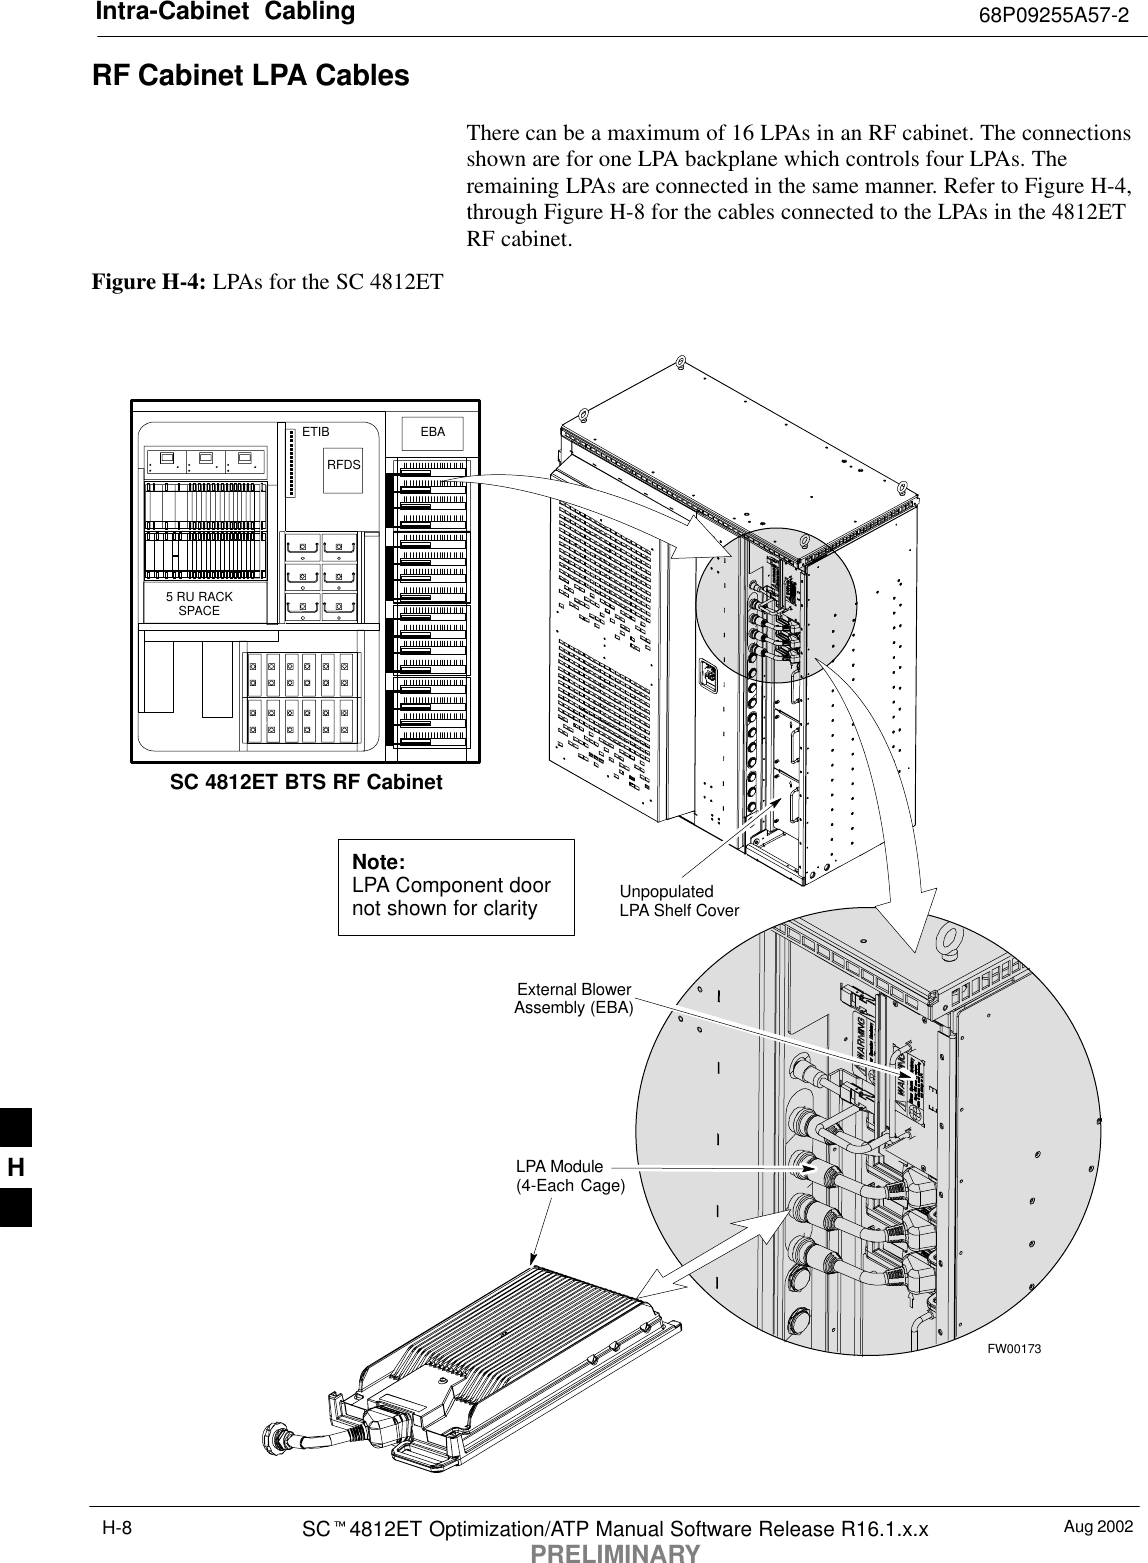 Intra-Cabinet  Cabling 68P09255A57-2Aug 2002SCt4812ET Optimization/ATP Manual Software Release R16.1.x.xPRELIMINARYH-8RF Cabinet LPA Cables There can be a maximum of 16 LPAs in an RF cabinet. The connectionsshown are for one LPA backplane which controls four LPAs. Theremaining LPAs are connected in the same manner. Refer to Figure H-4,through Figure H-8 for the cables connected to the LPAs in the 4812ETRF cabinet.Figure H-4: LPAs for the SC 4812ET5 RU RACKSPACERFDSEBAETIBUnpopulatedLPA Shelf CoverLPA Module(4-Each Cage)External BlowerAssembly (EBA)Note:LPA Component doornot shown for claritySC 4812ET BTS RF CabinetFW00173H